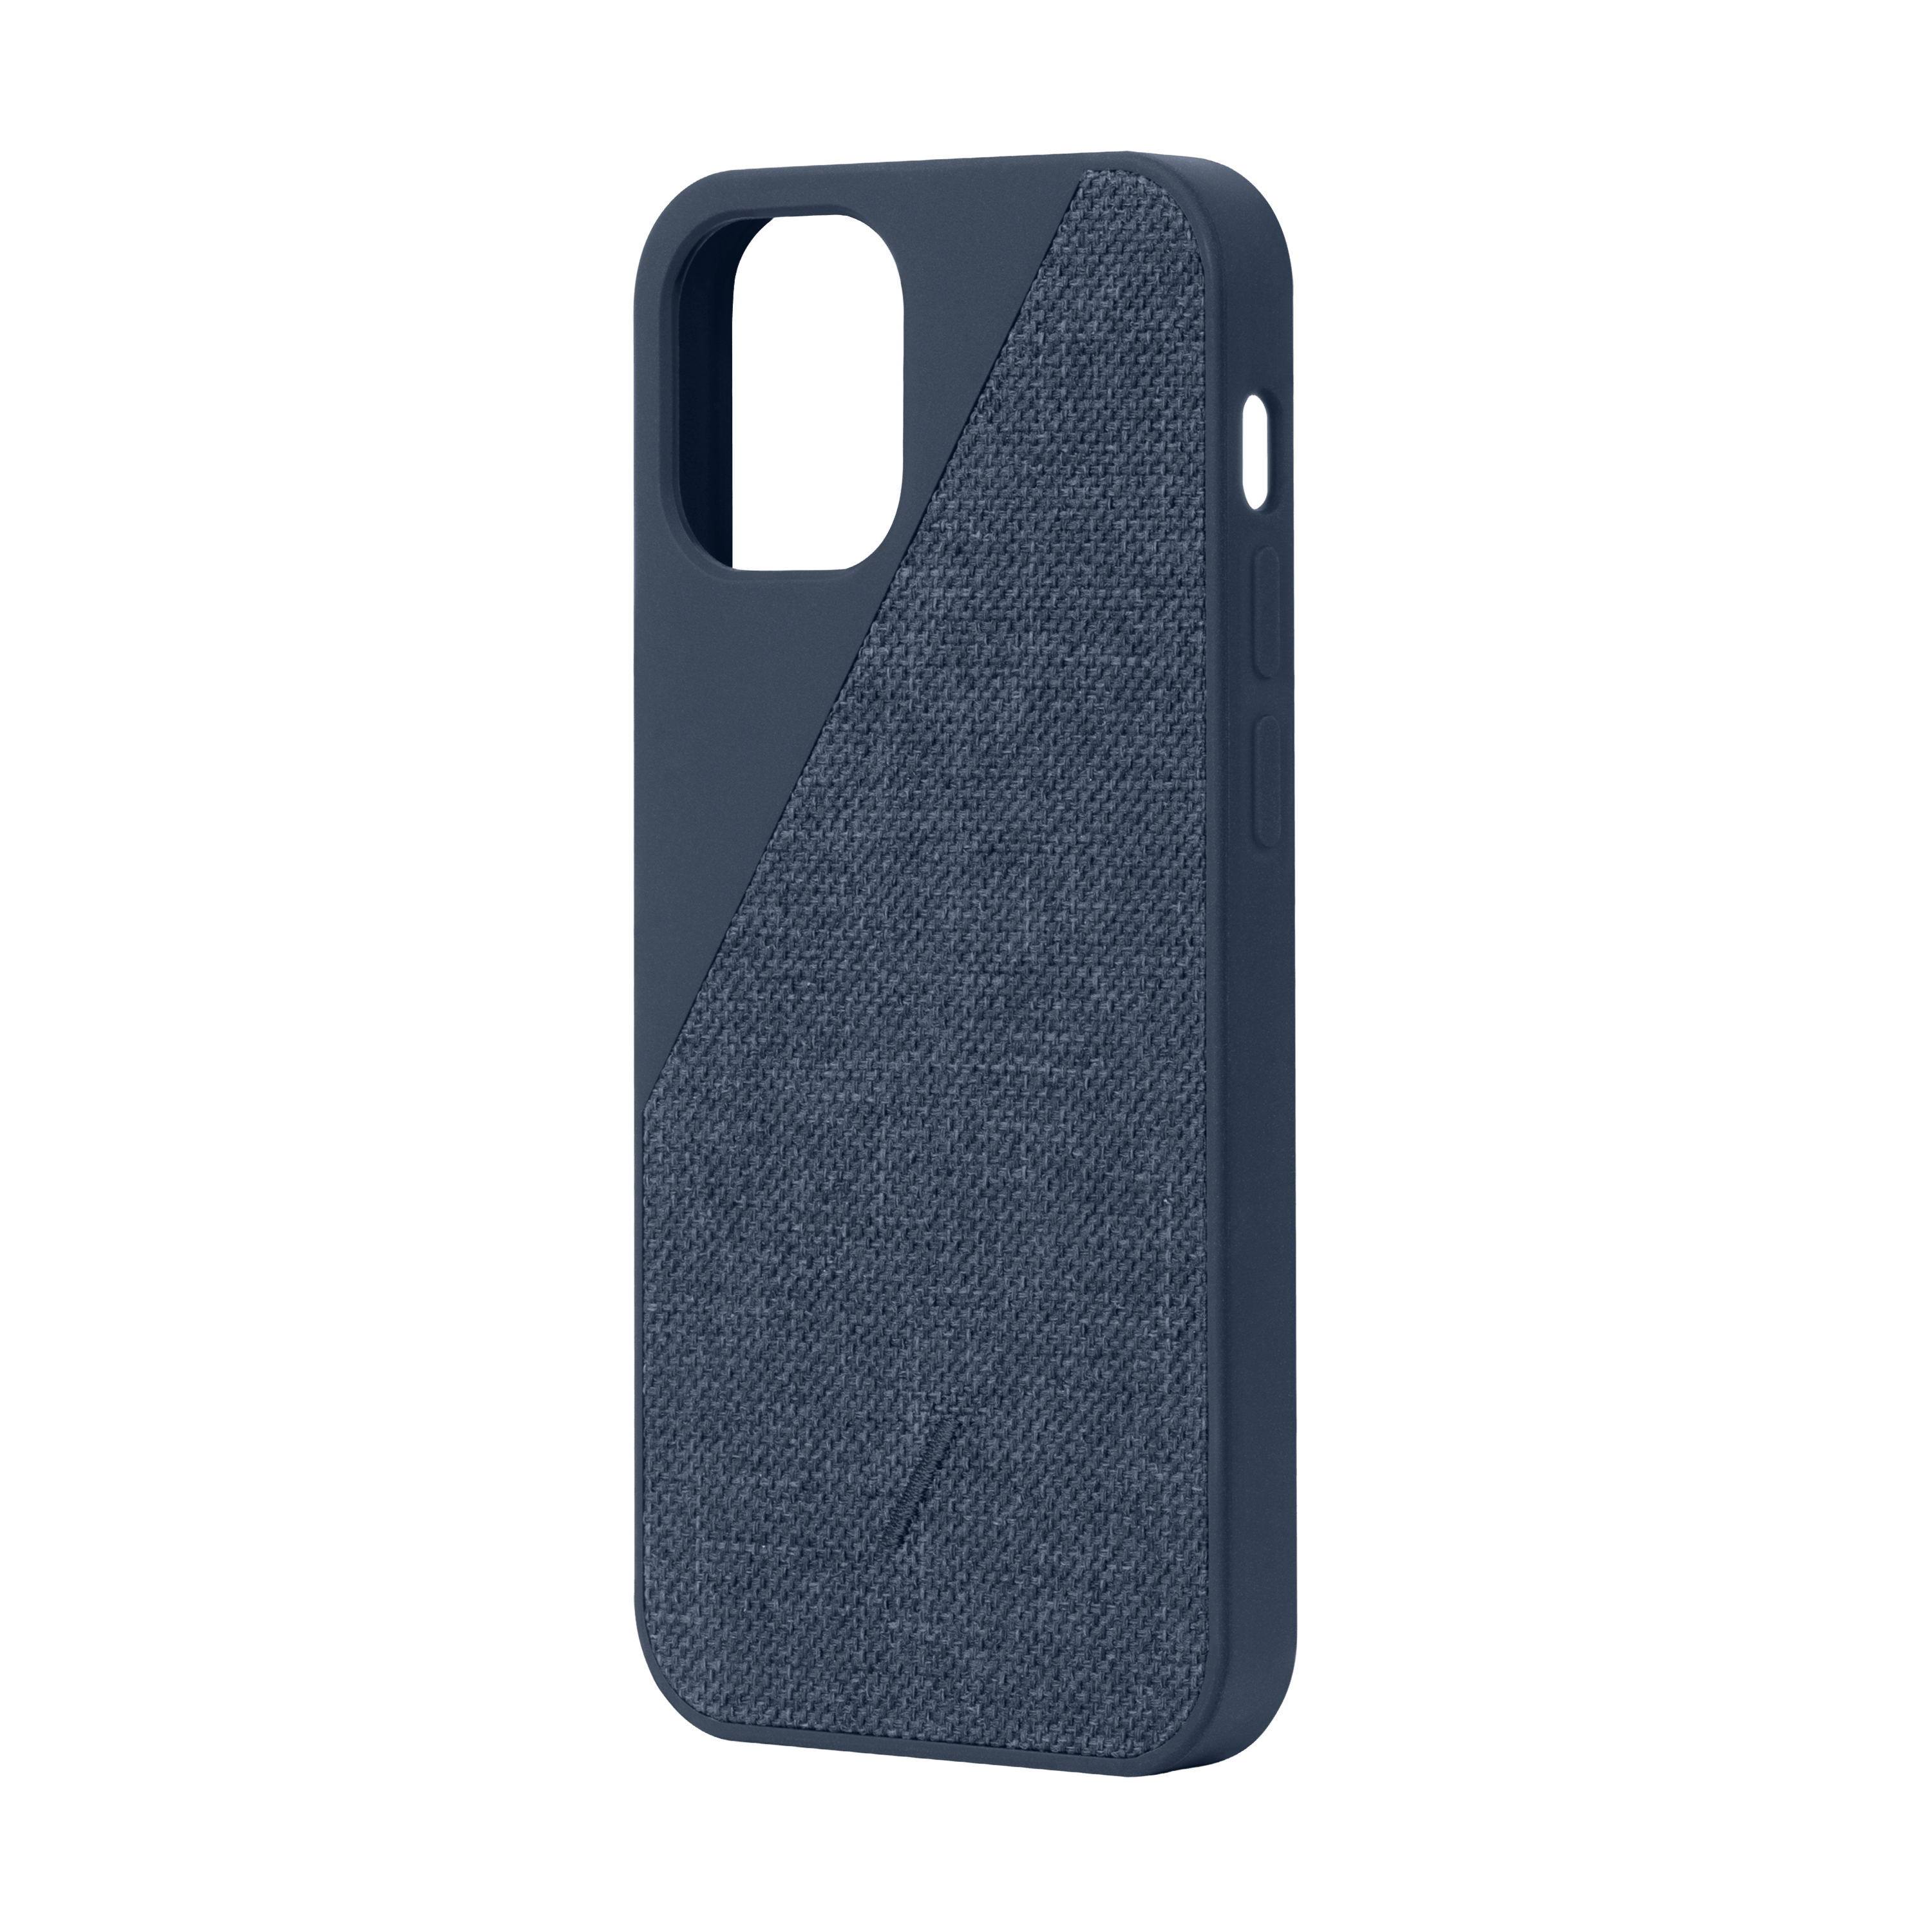 pris Fritagelse Tigge Order Native Union CLIC CANVAS Apple iPhone 12 Mini Case - Handcrafted  Fabric, Drop-Proof Slim Cover, Wireless & MagSafe Charging Compatible  (Indigo) Now! | Jomla.ae